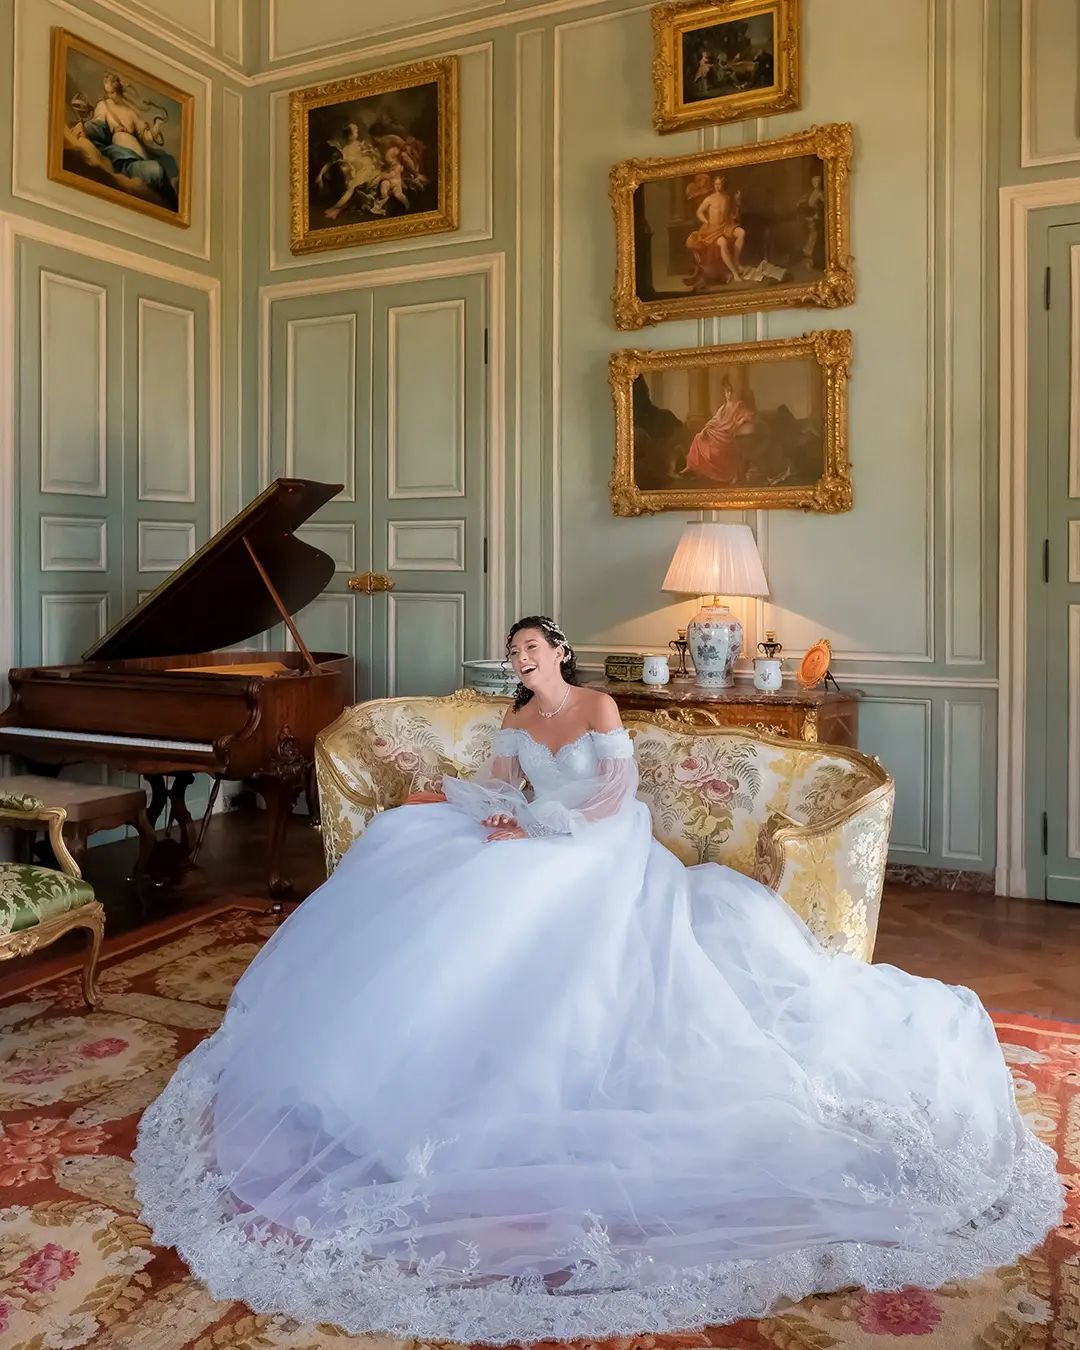 A bride's wedding day is filled with a spectrum of emotions, and we delight in capturing every one of them. In the elegant salon at the unique @chateau_de_villette , Gaya awaited her walk down the aisle. The air was thick with a blend of emotions. Ou